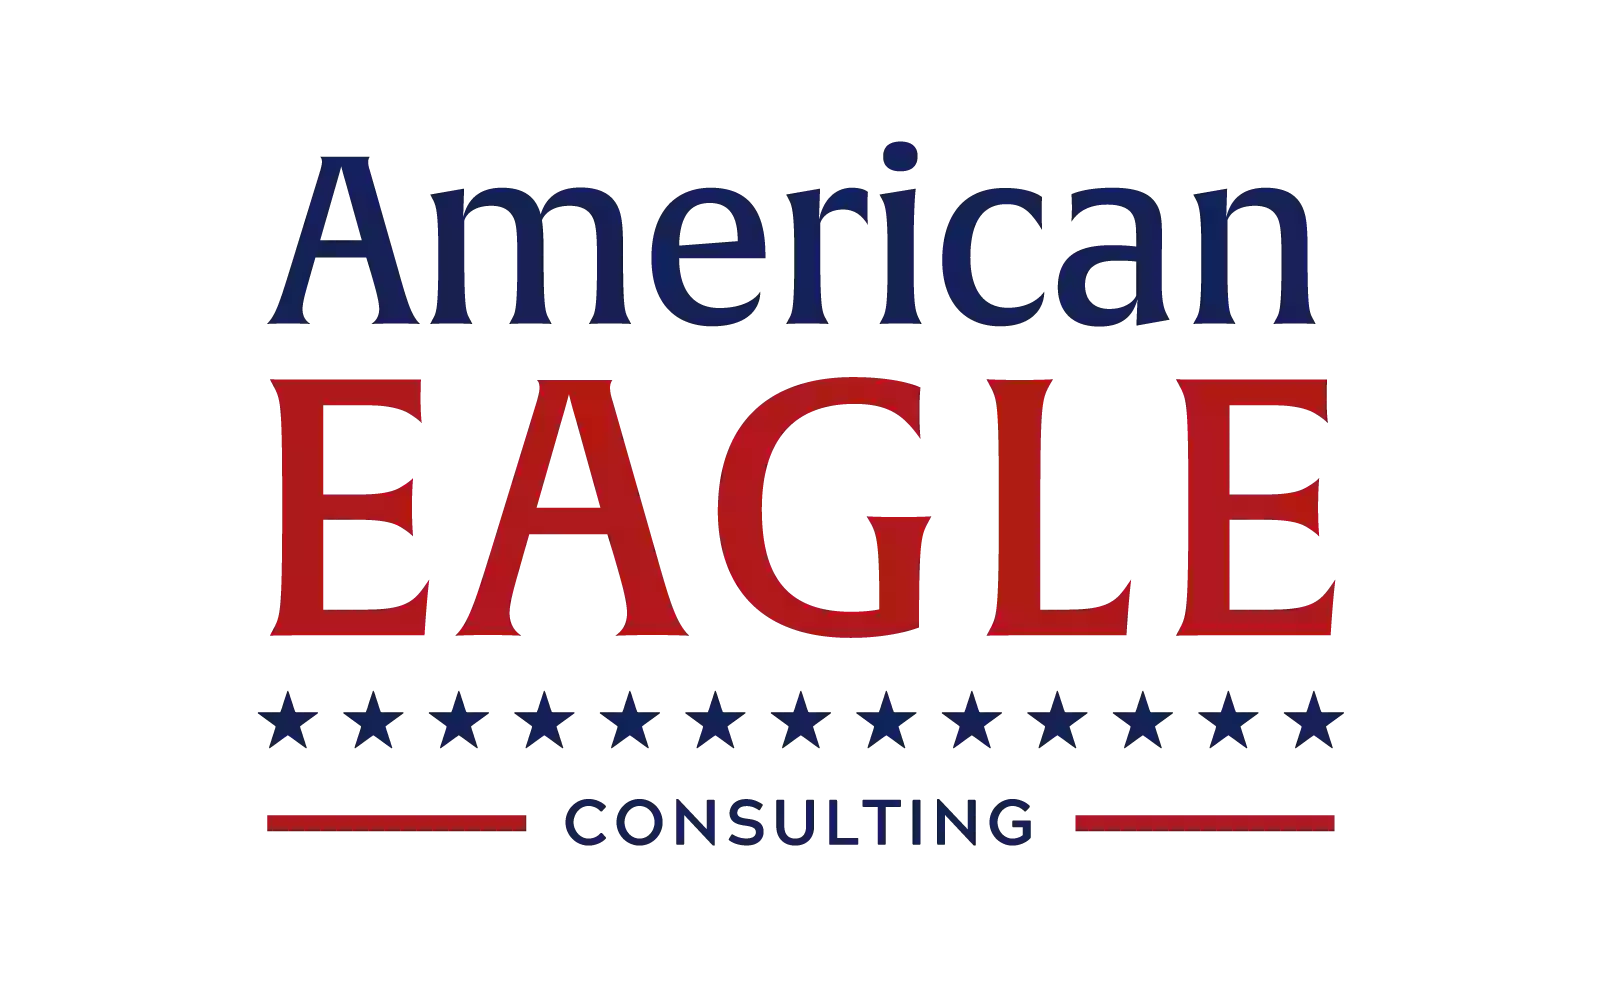 American Eagle Consulting and Bookkeeping